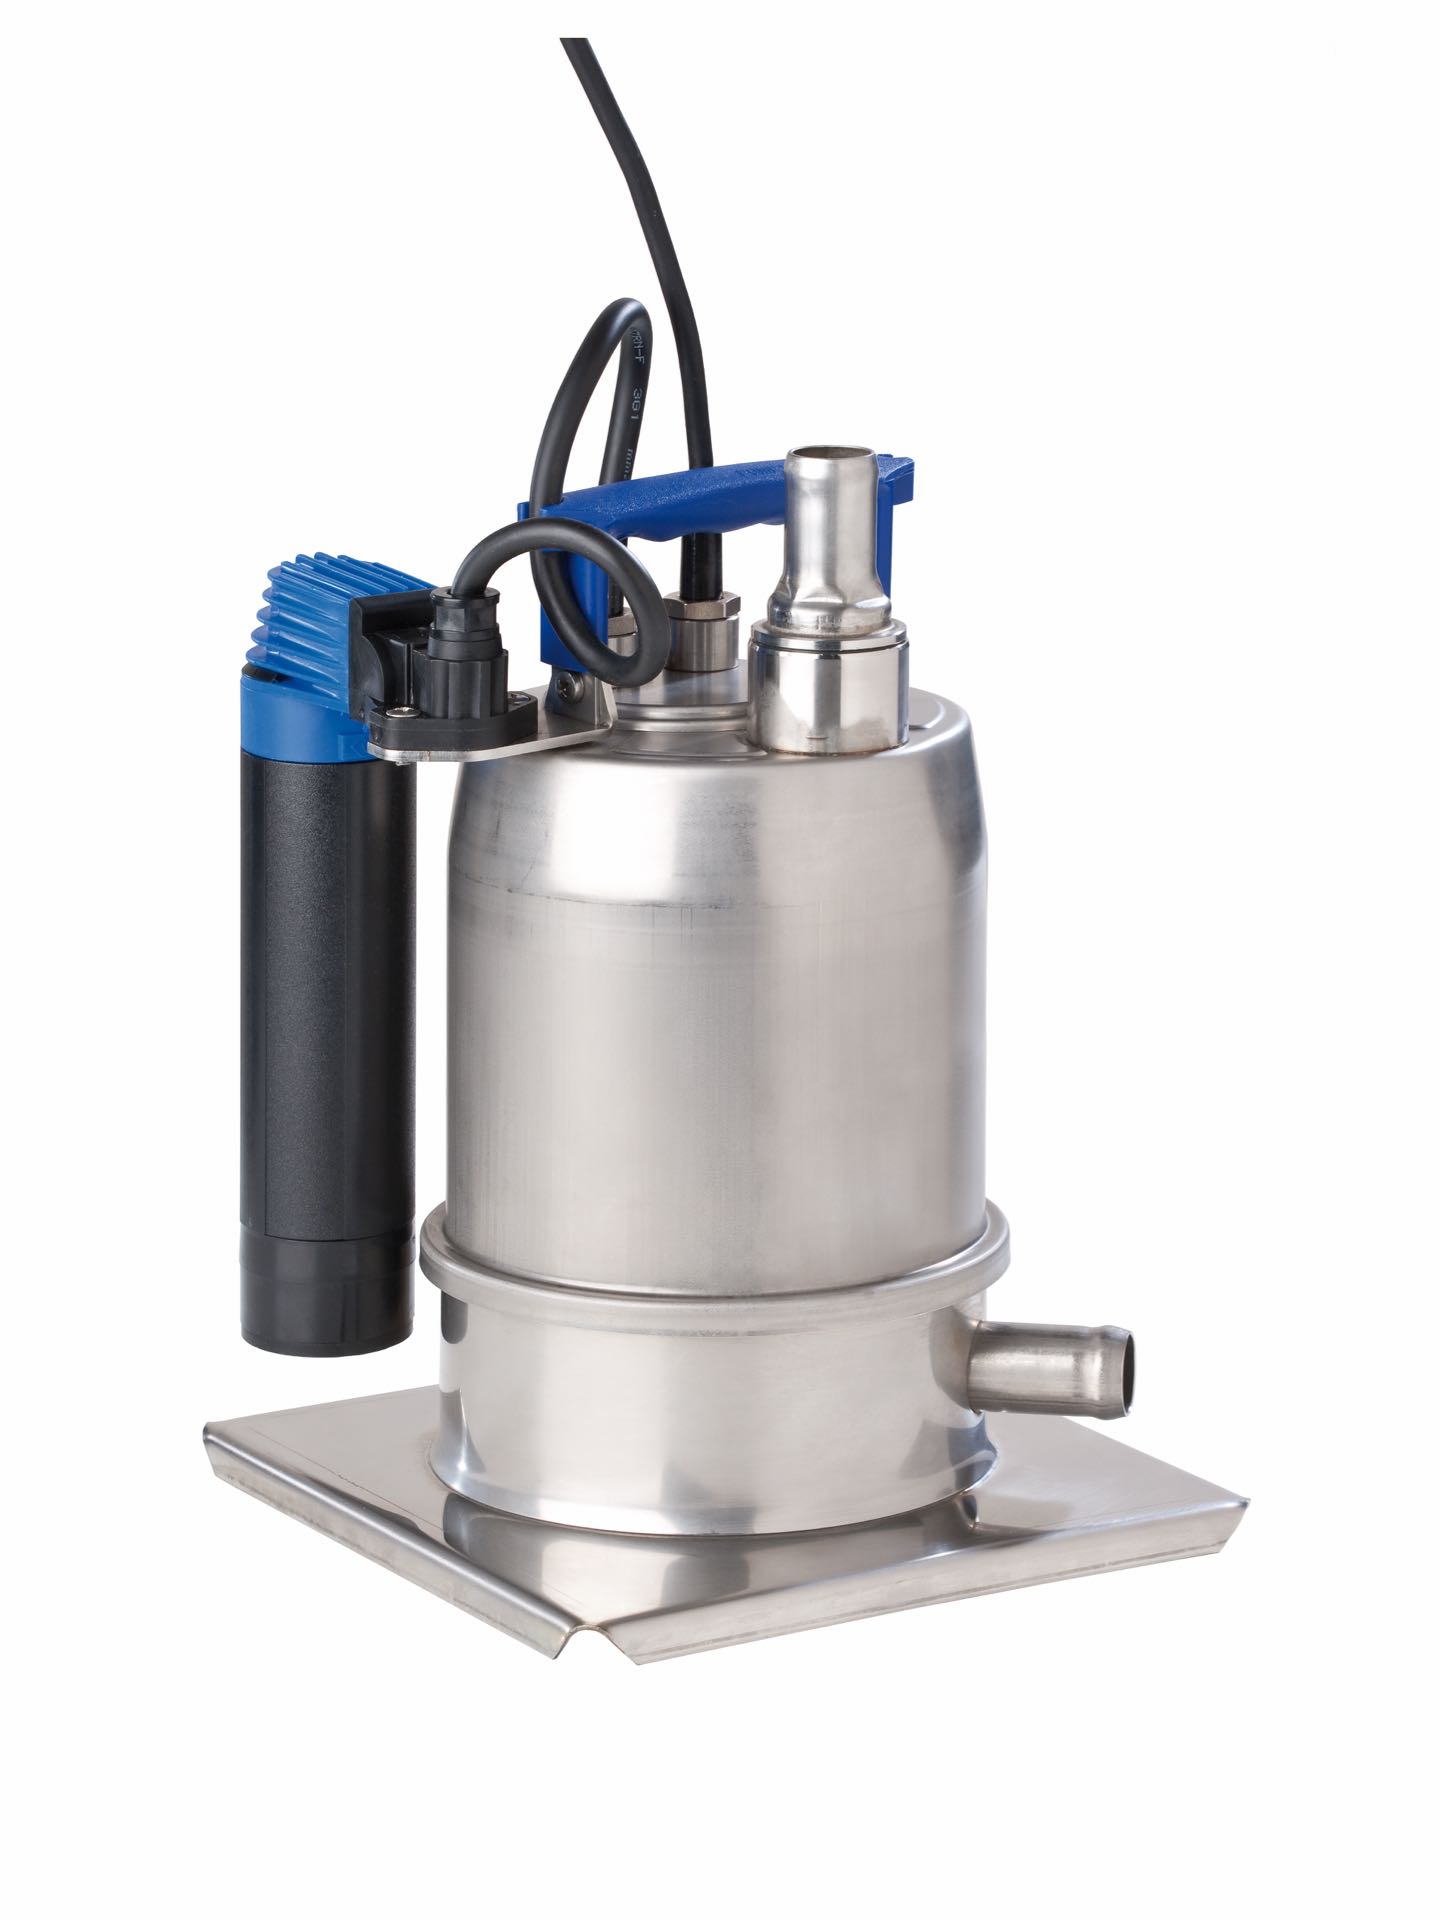 Provedo submersible feed pump